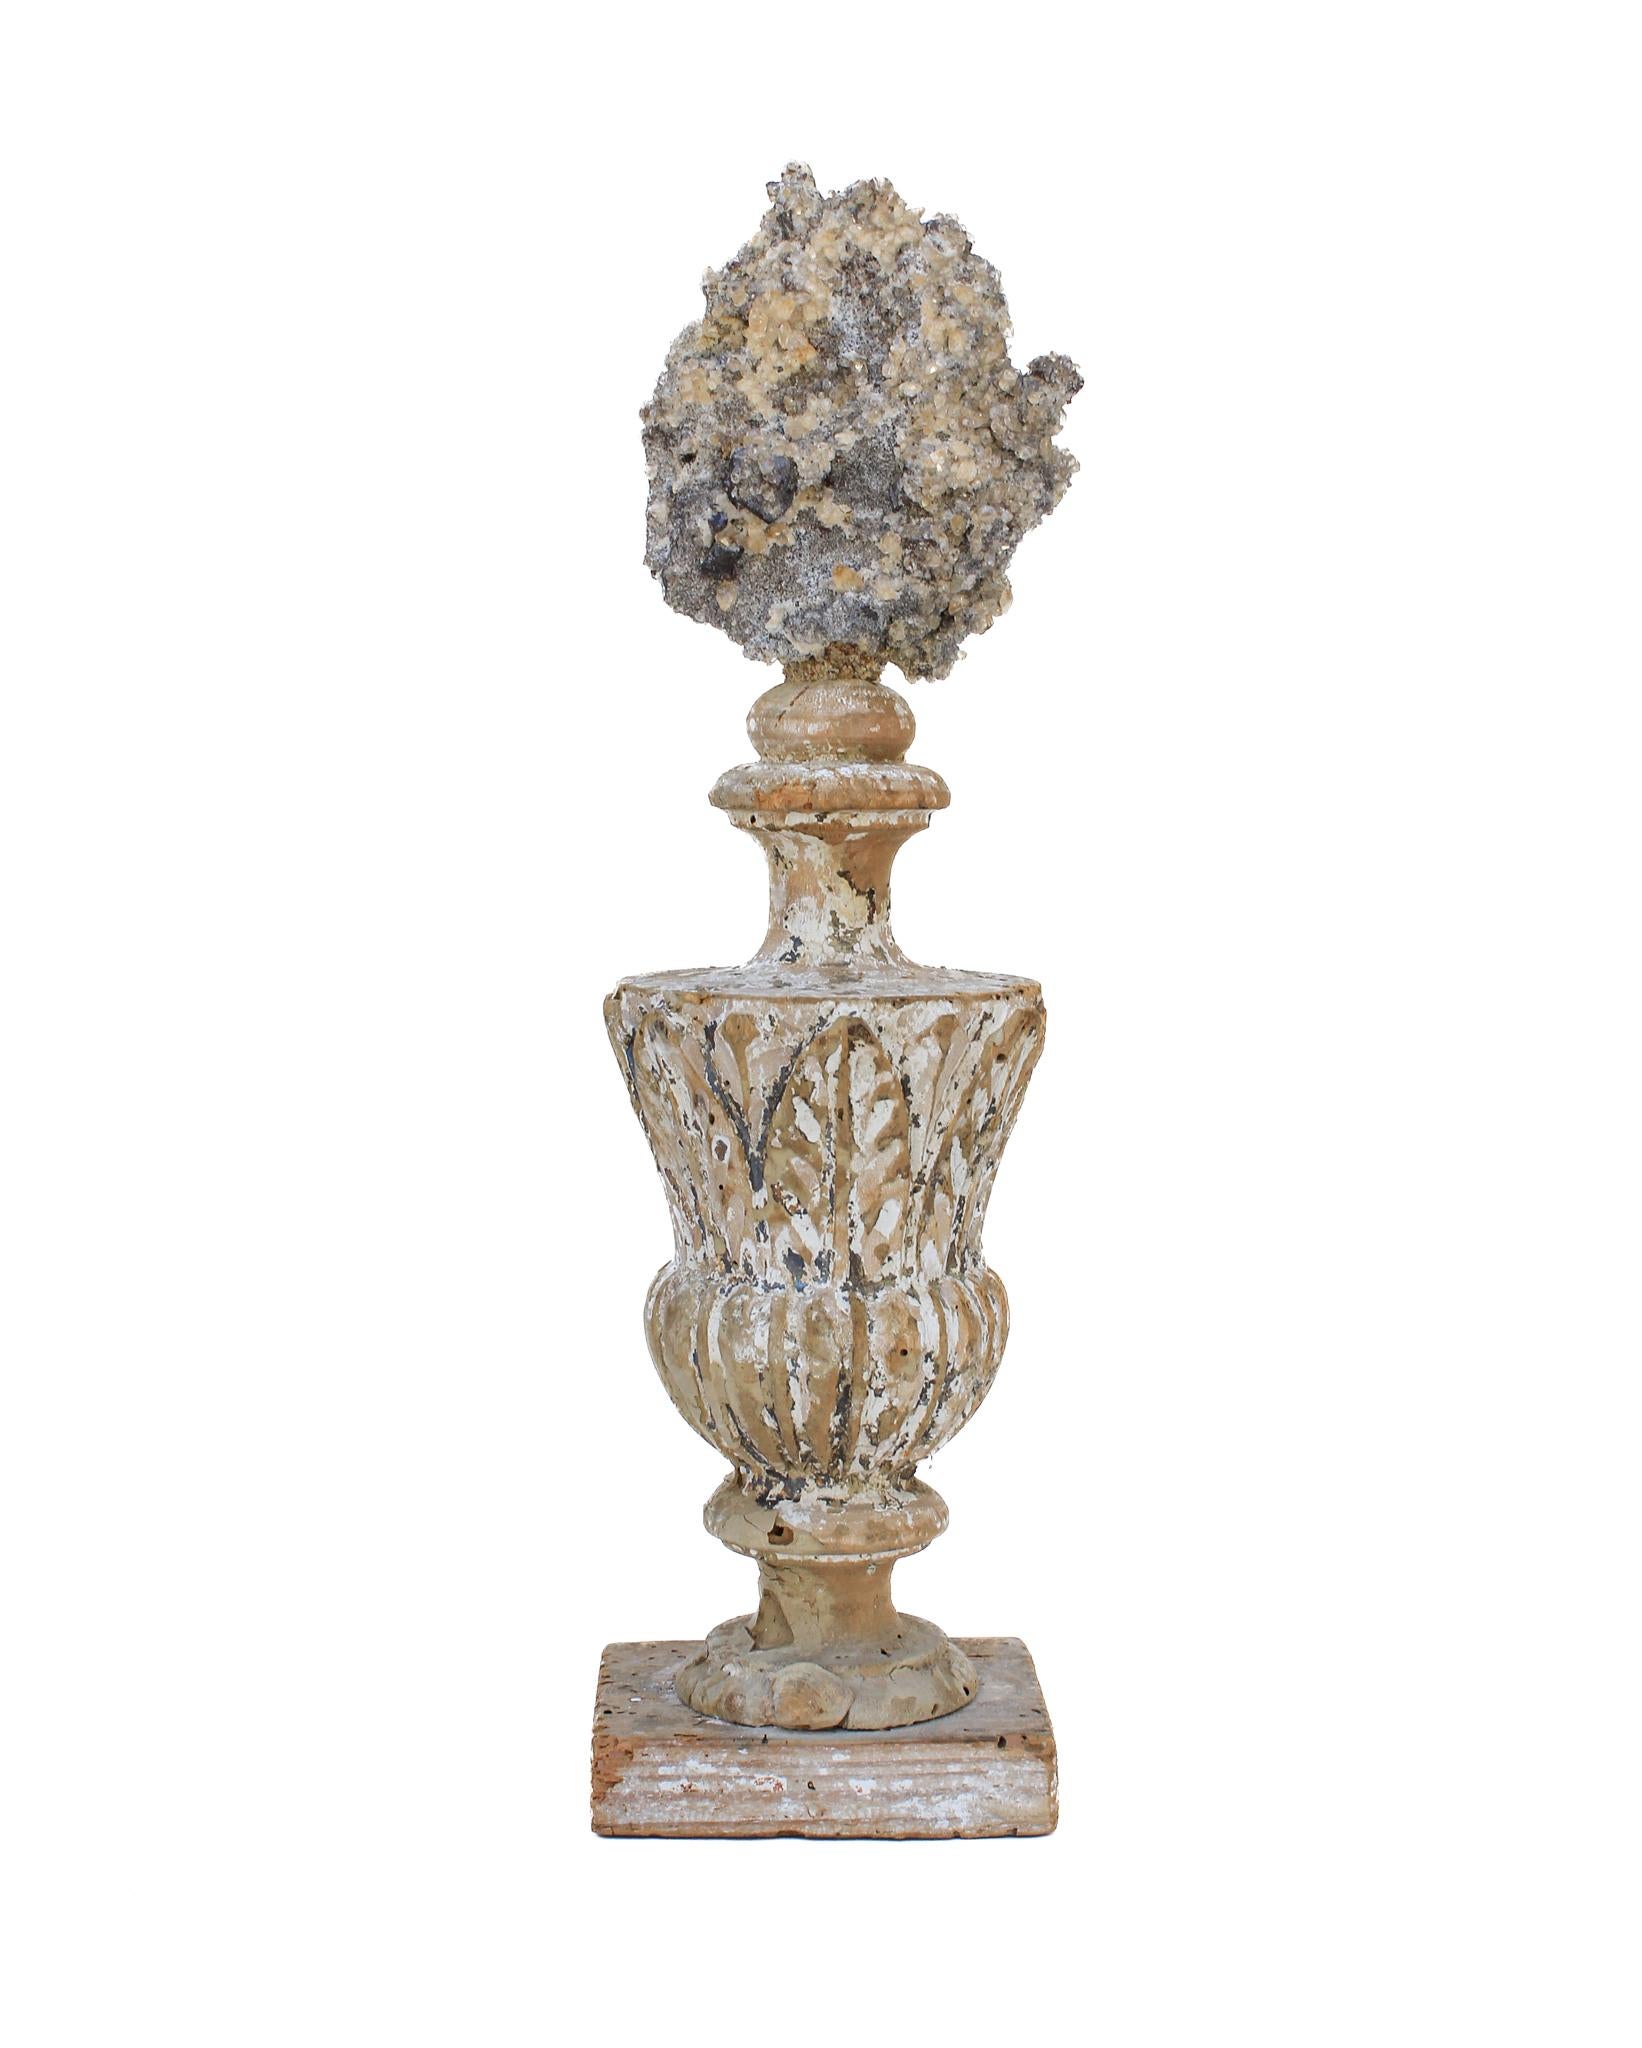 17th century Italian vase with a calcite crystal cluster in matrix with sphalerite.

This fragment is from a church in Florence. It was found and saved from the historic flooding of the Arno River in 1966.

The calcite crystal cluster with